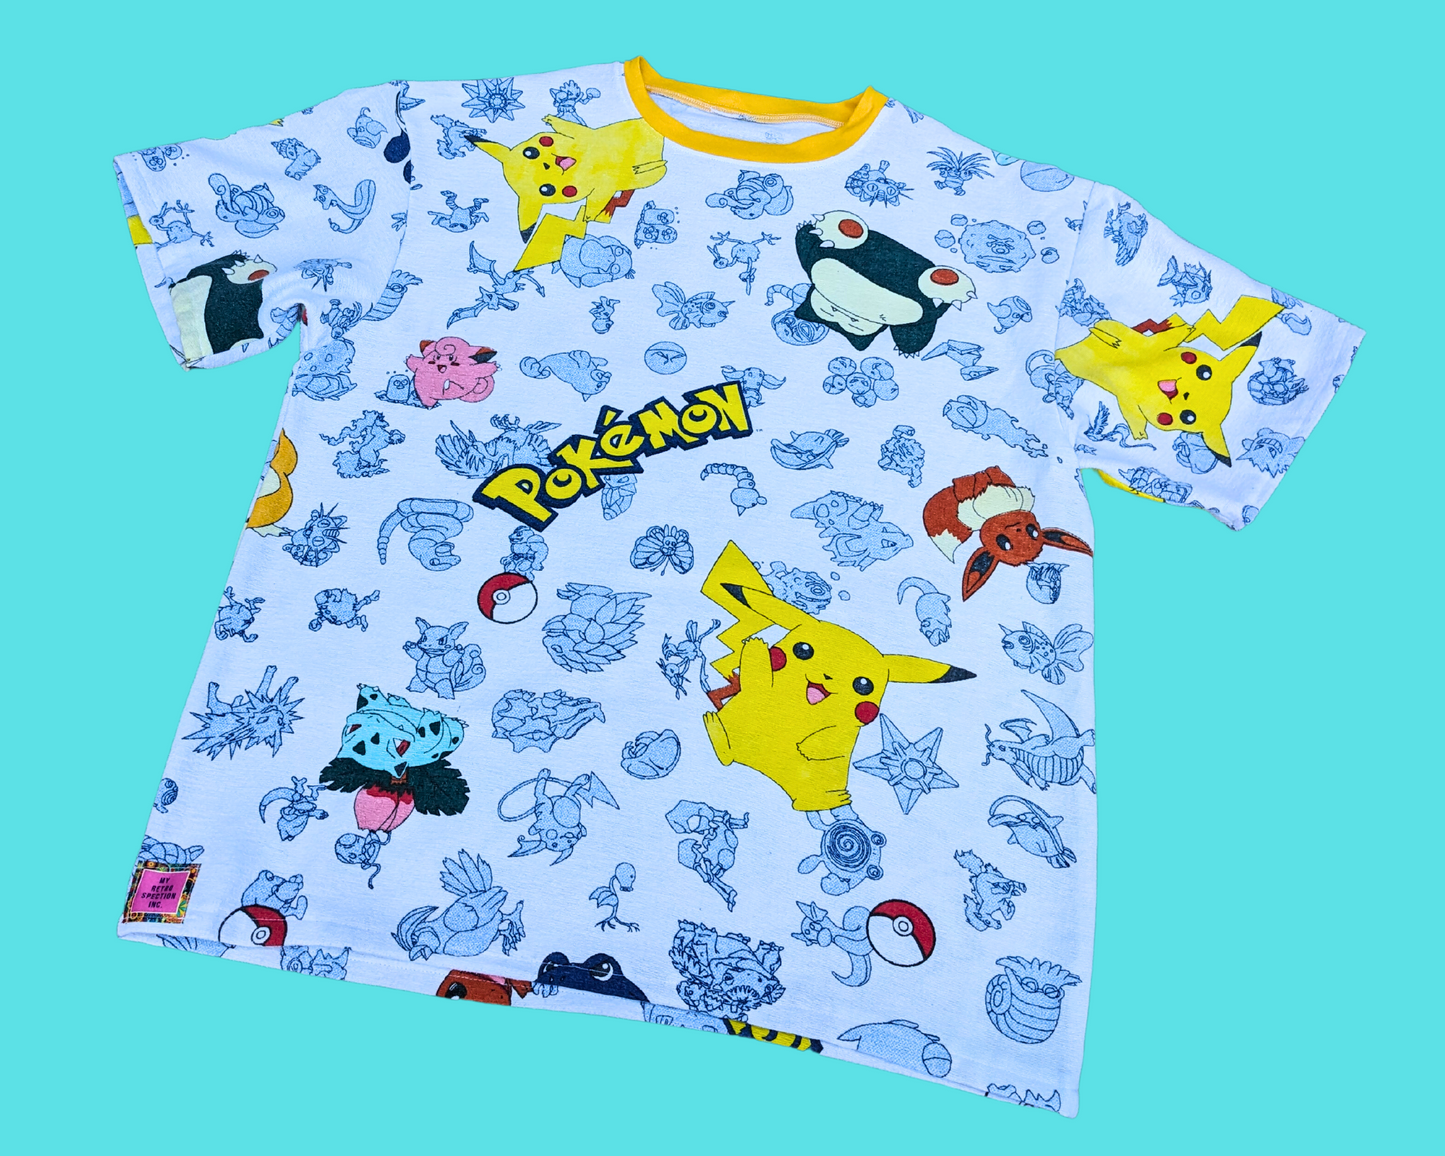 Handmade, Upcycled Pokemon Flannel Bedsheet T-Shirt Oversized XS - Fits Like A Size M